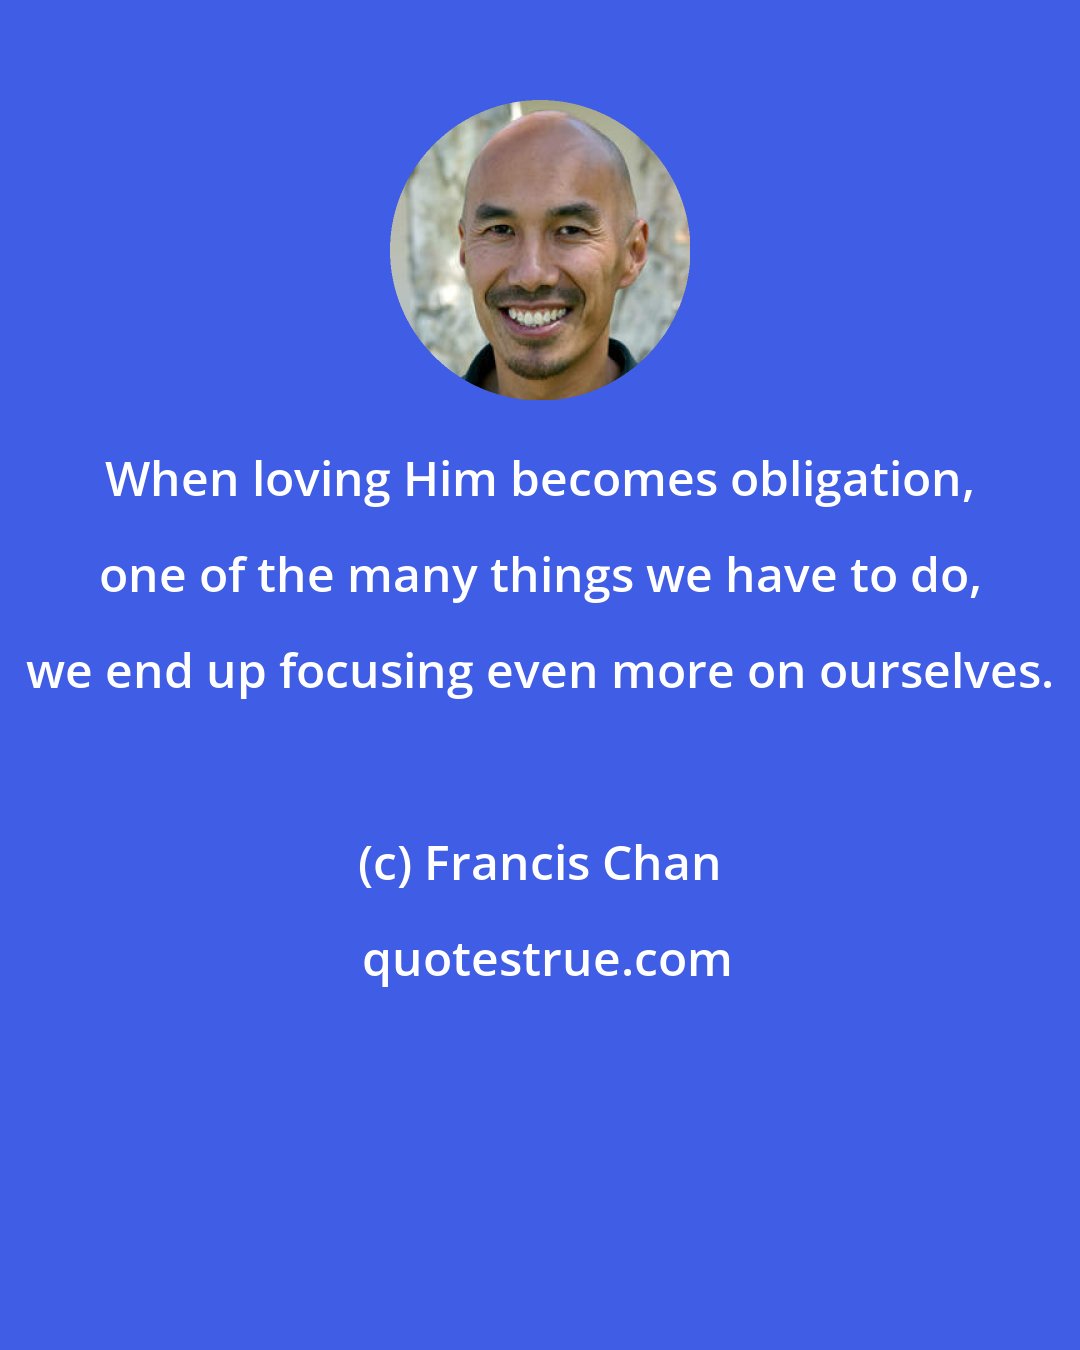 Francis Chan: When loving Him becomes obligation, one of the many things we have to do, we end up focusing even more on ourselves.